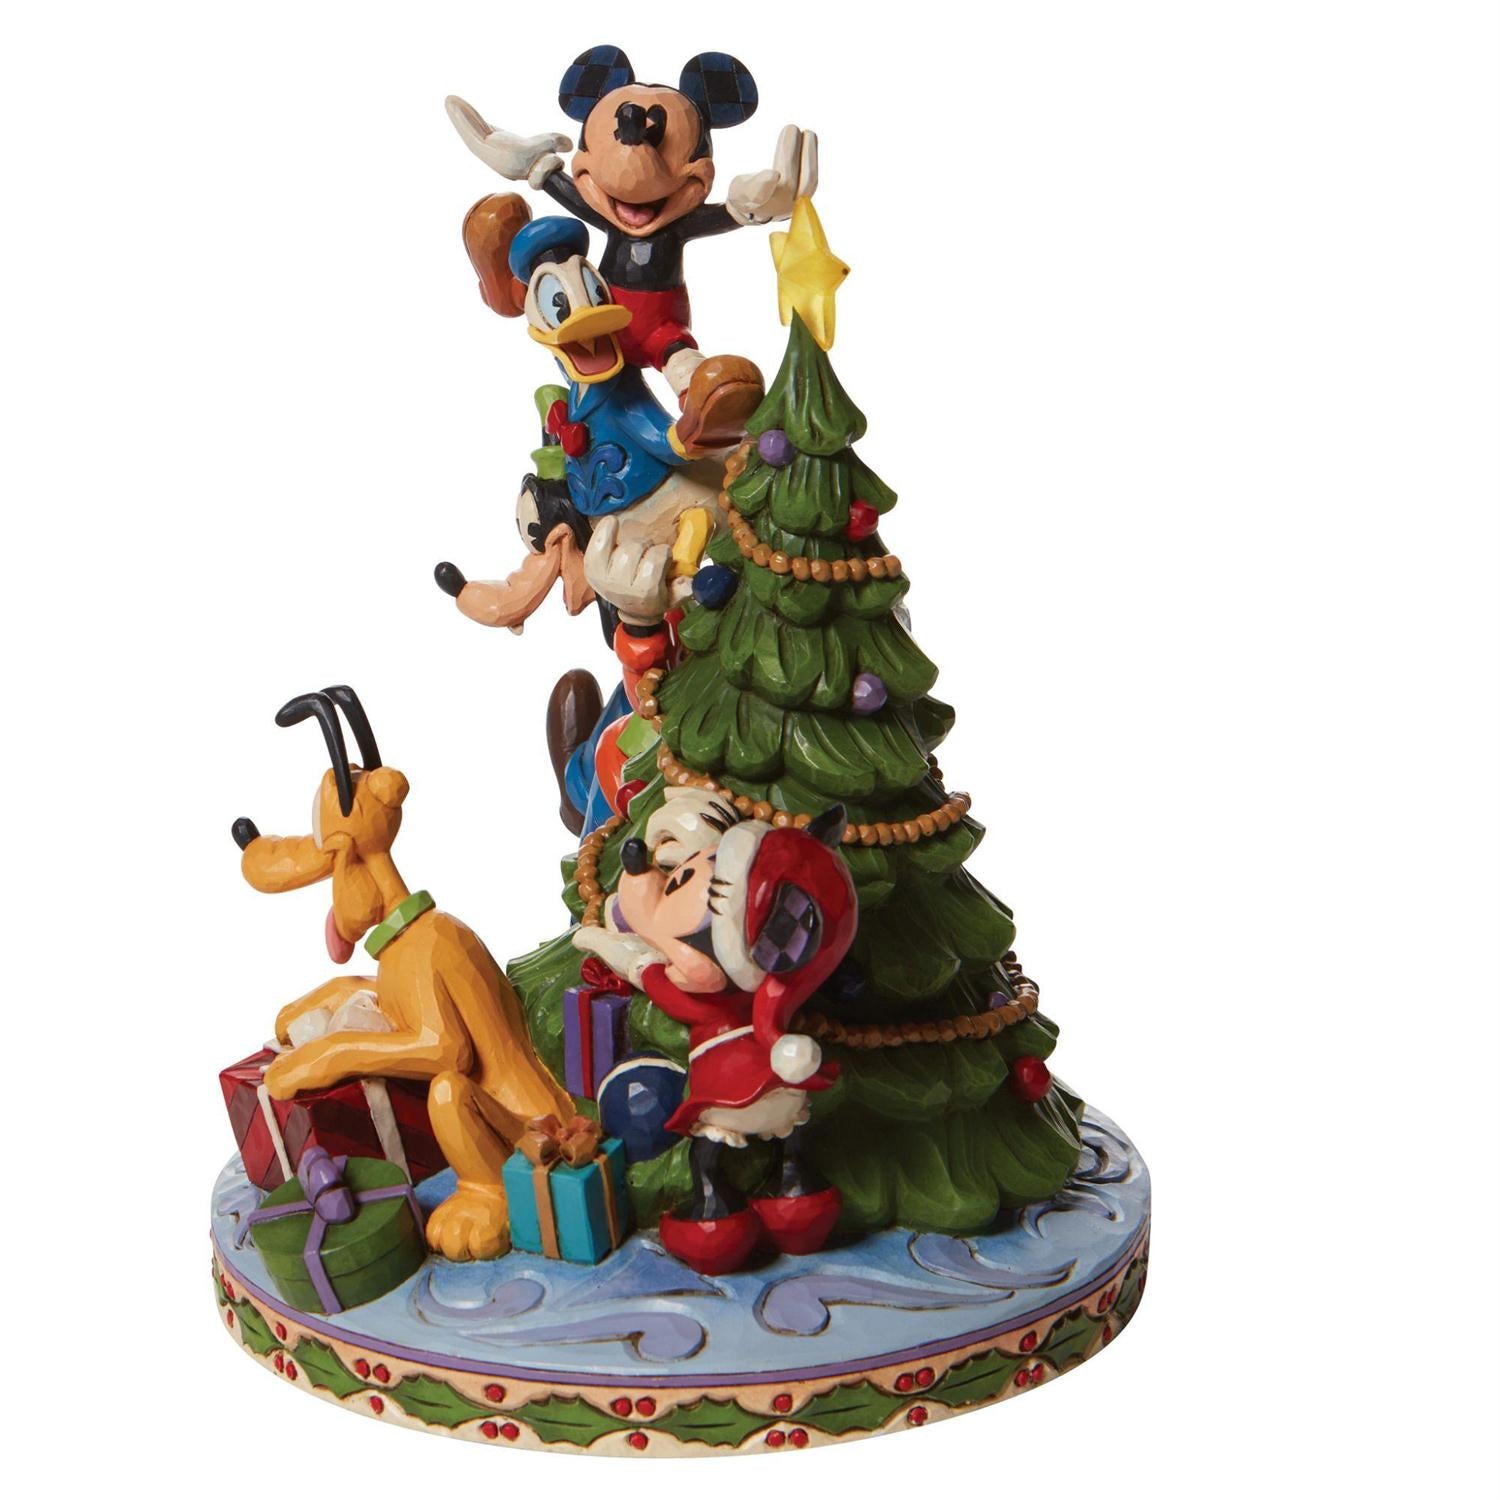 Caroling Carved by Heart - Disney Collectible By Jim Shore – Disney Art On  Main Street